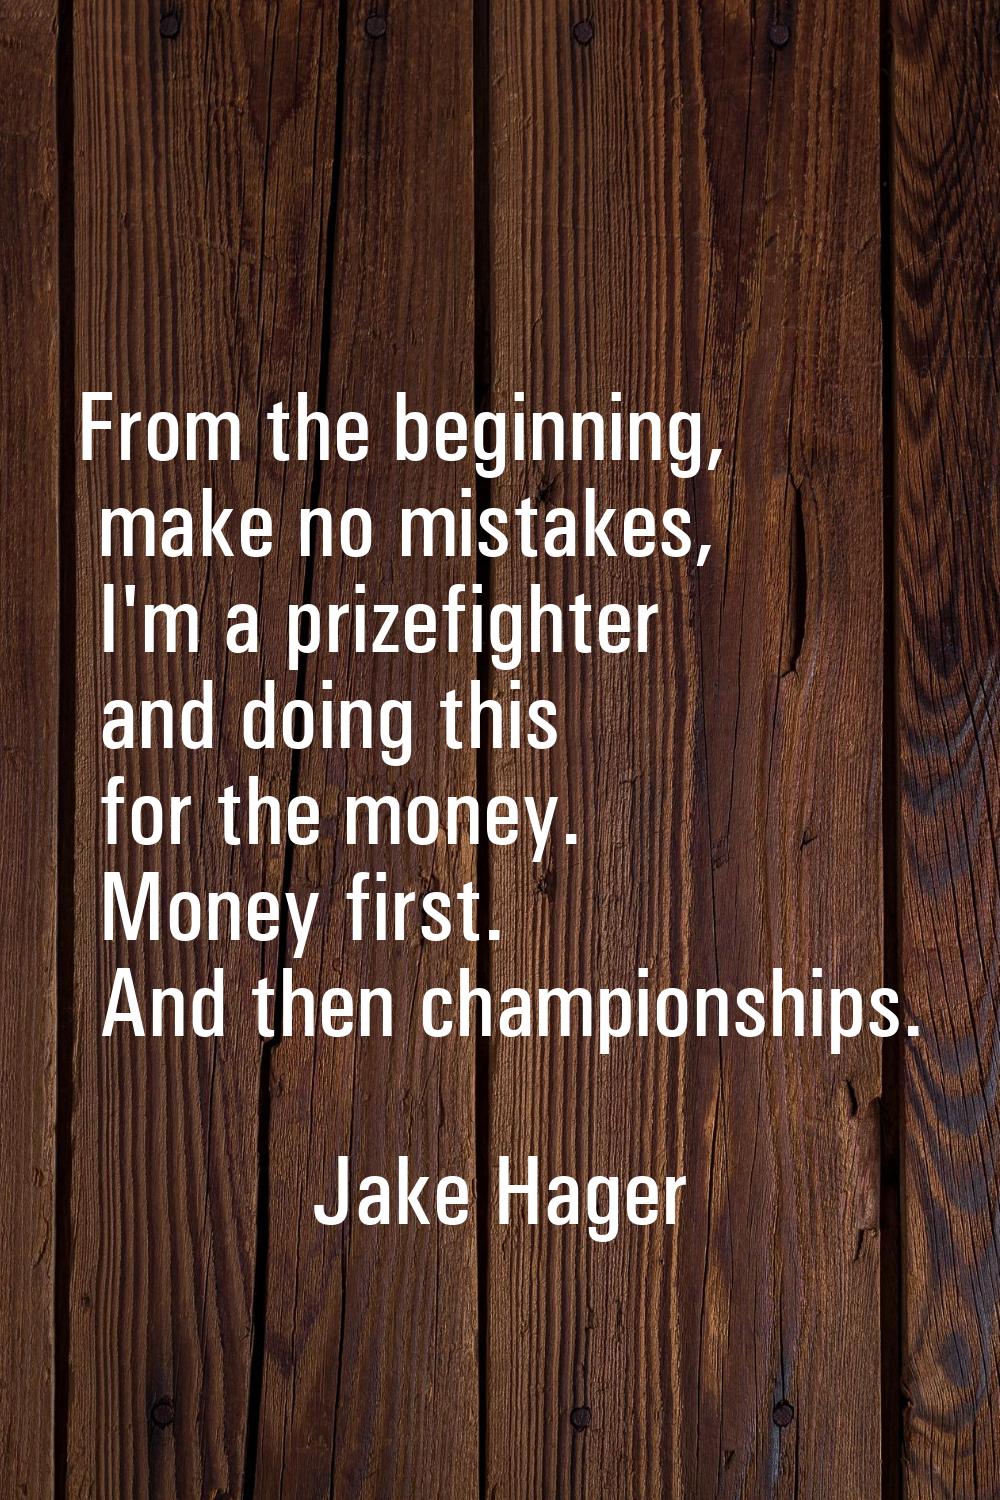 From the beginning, make no mistakes, I'm a prizefighter and doing this for the money. Money first.